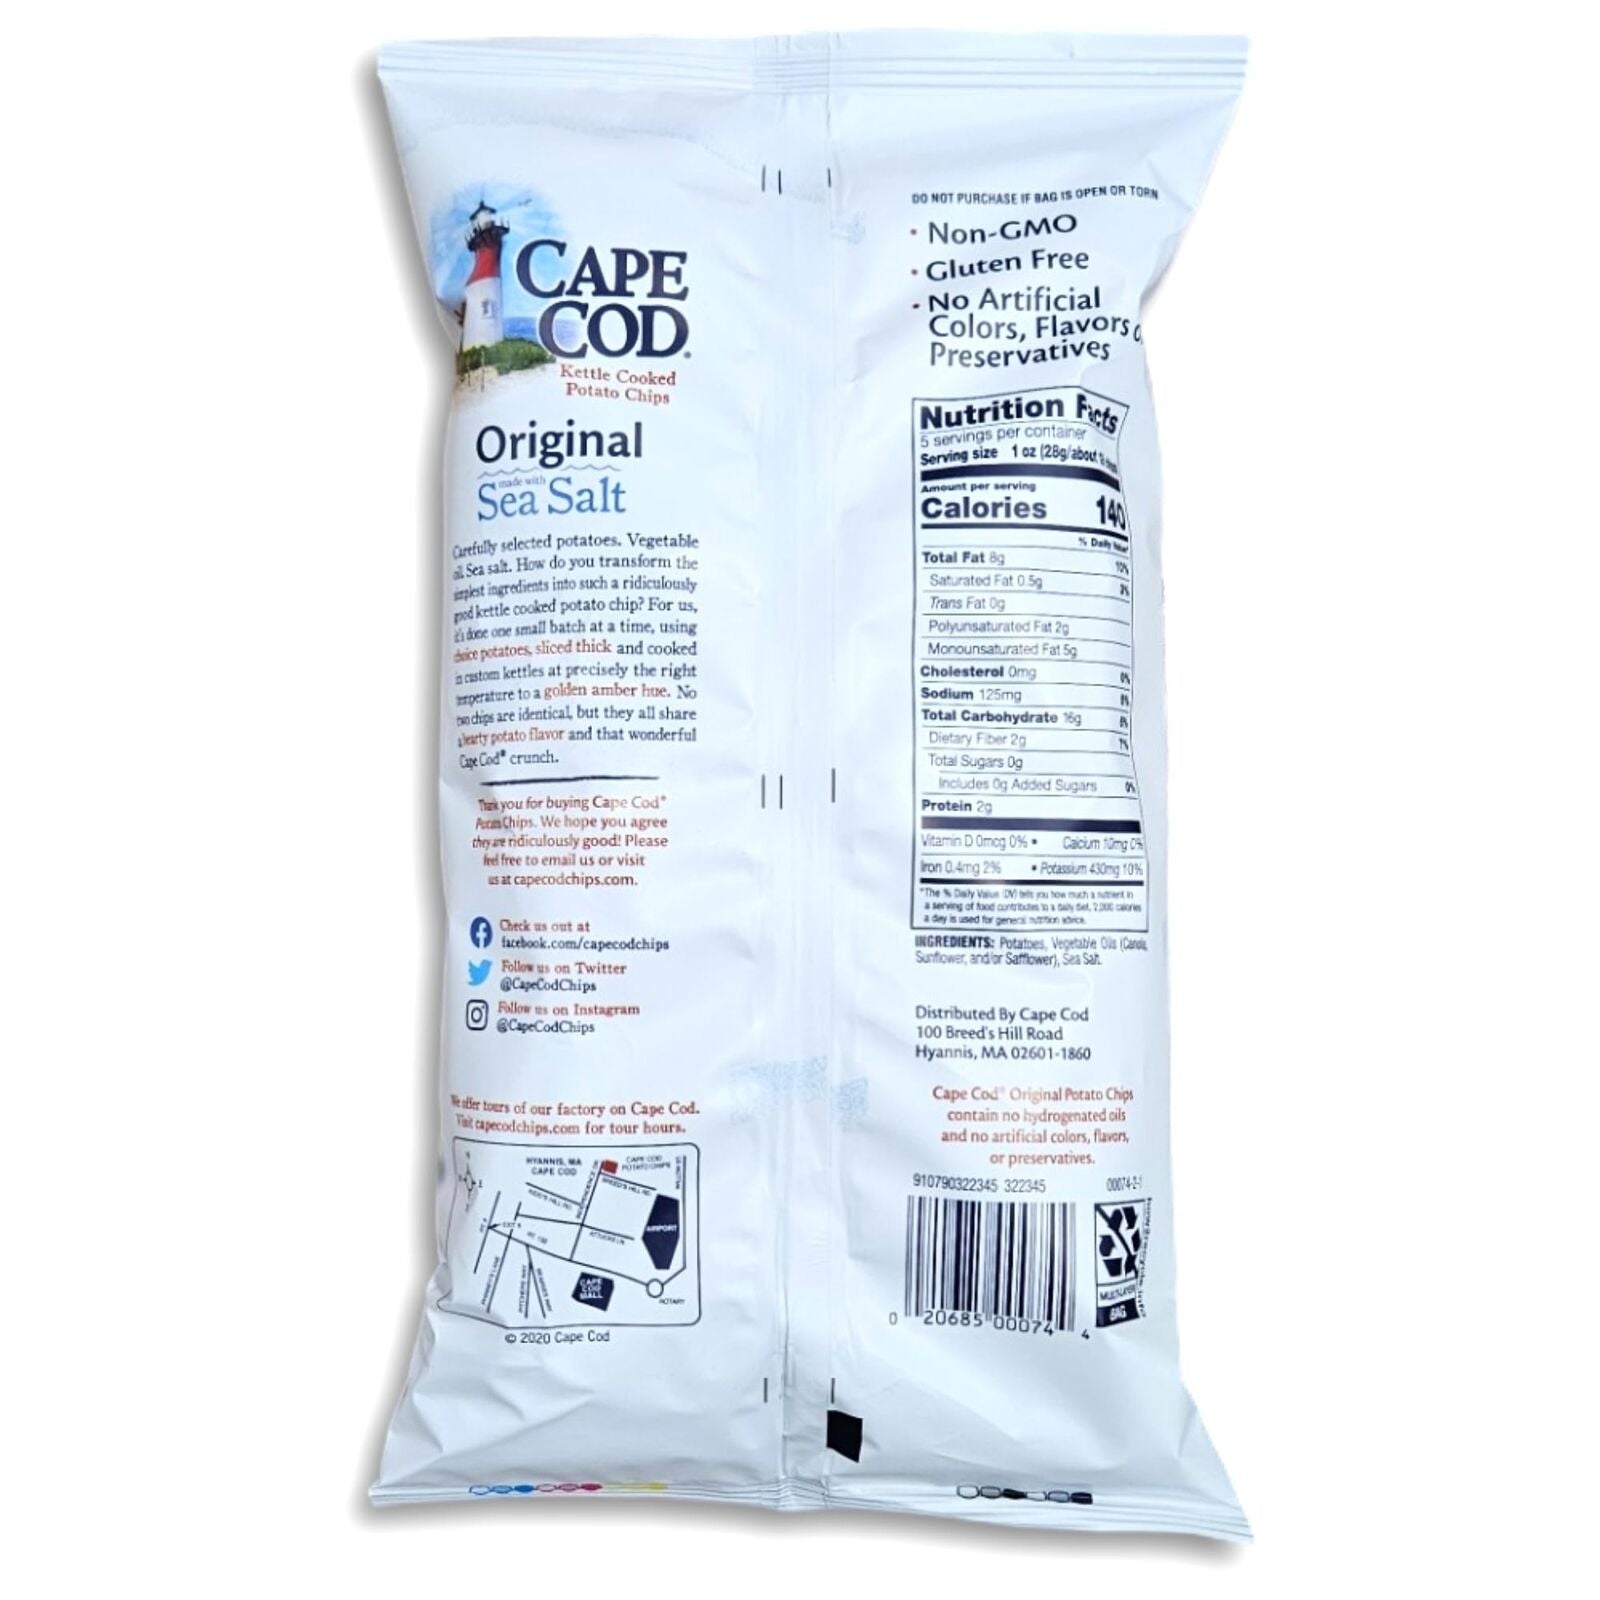 Cape Cod Kettle Cooked Potato Chips Value Pack | Bundled by Tribeca Curations,